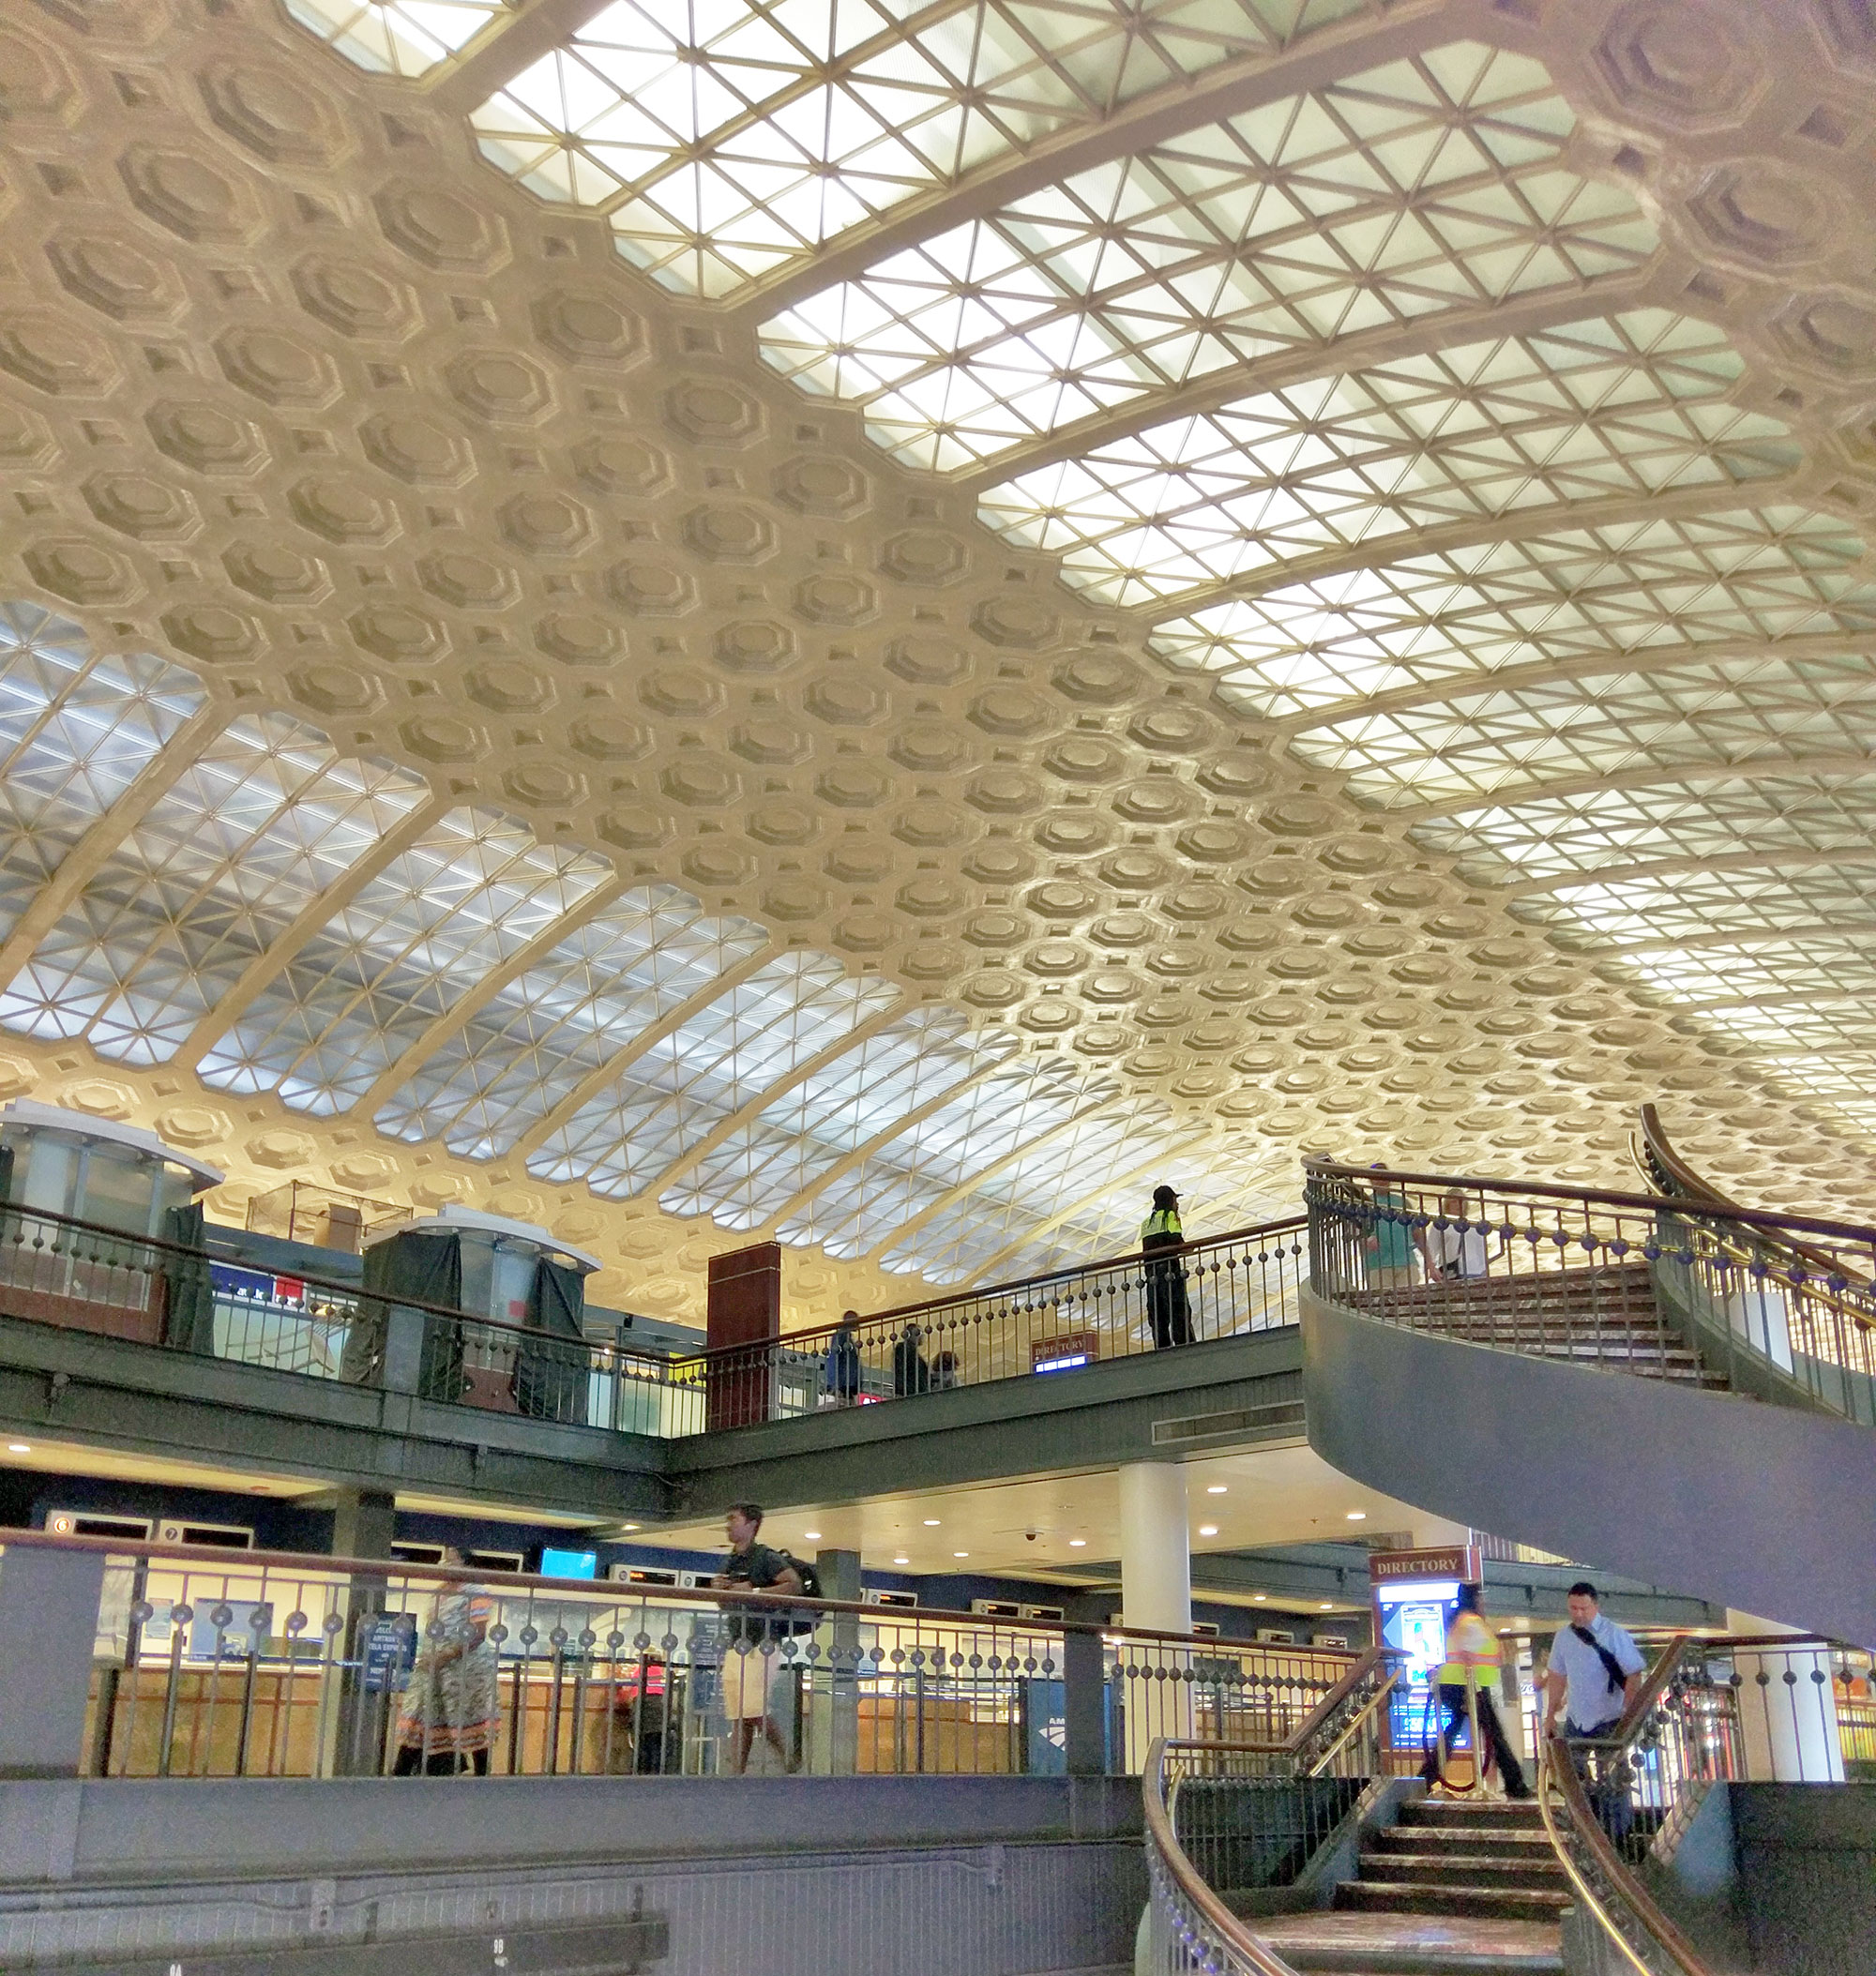 The interior of Union Station in Washington D.C.